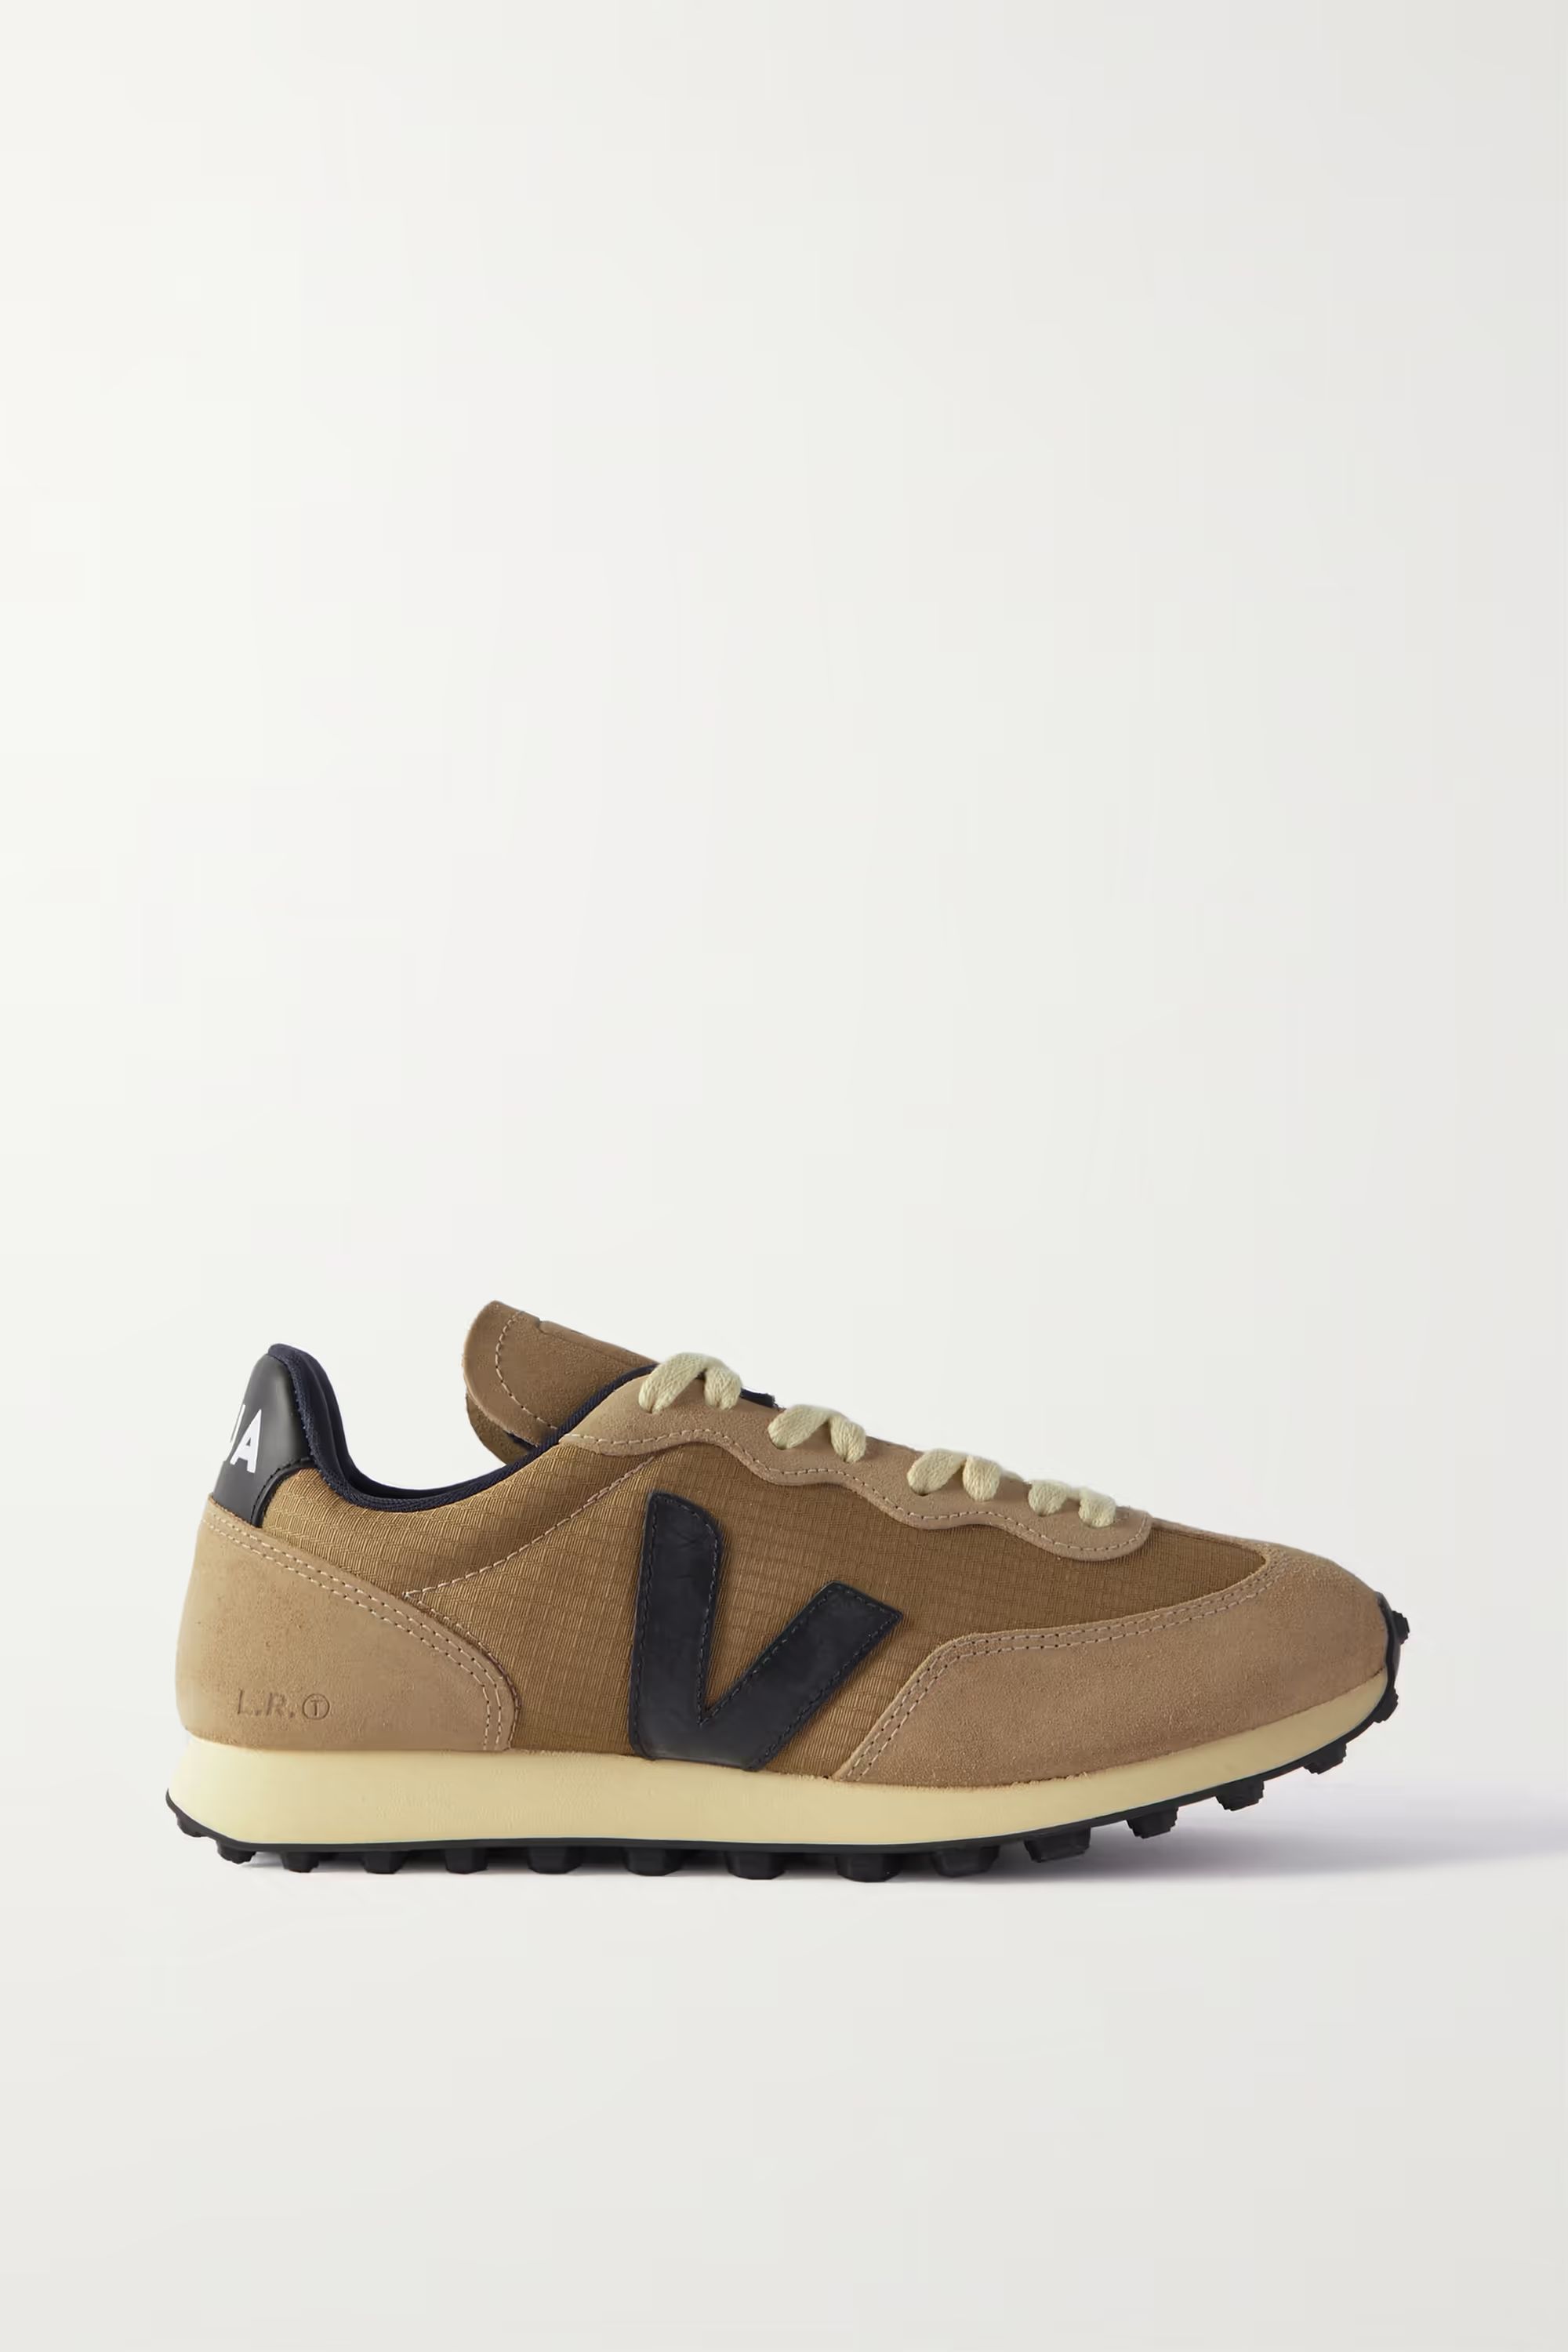 Beige Rio Branco suede and leather-trimmed Alveomesh sneakers | VEJA | NET-A-PORTER | NET-A-PORTER (US)